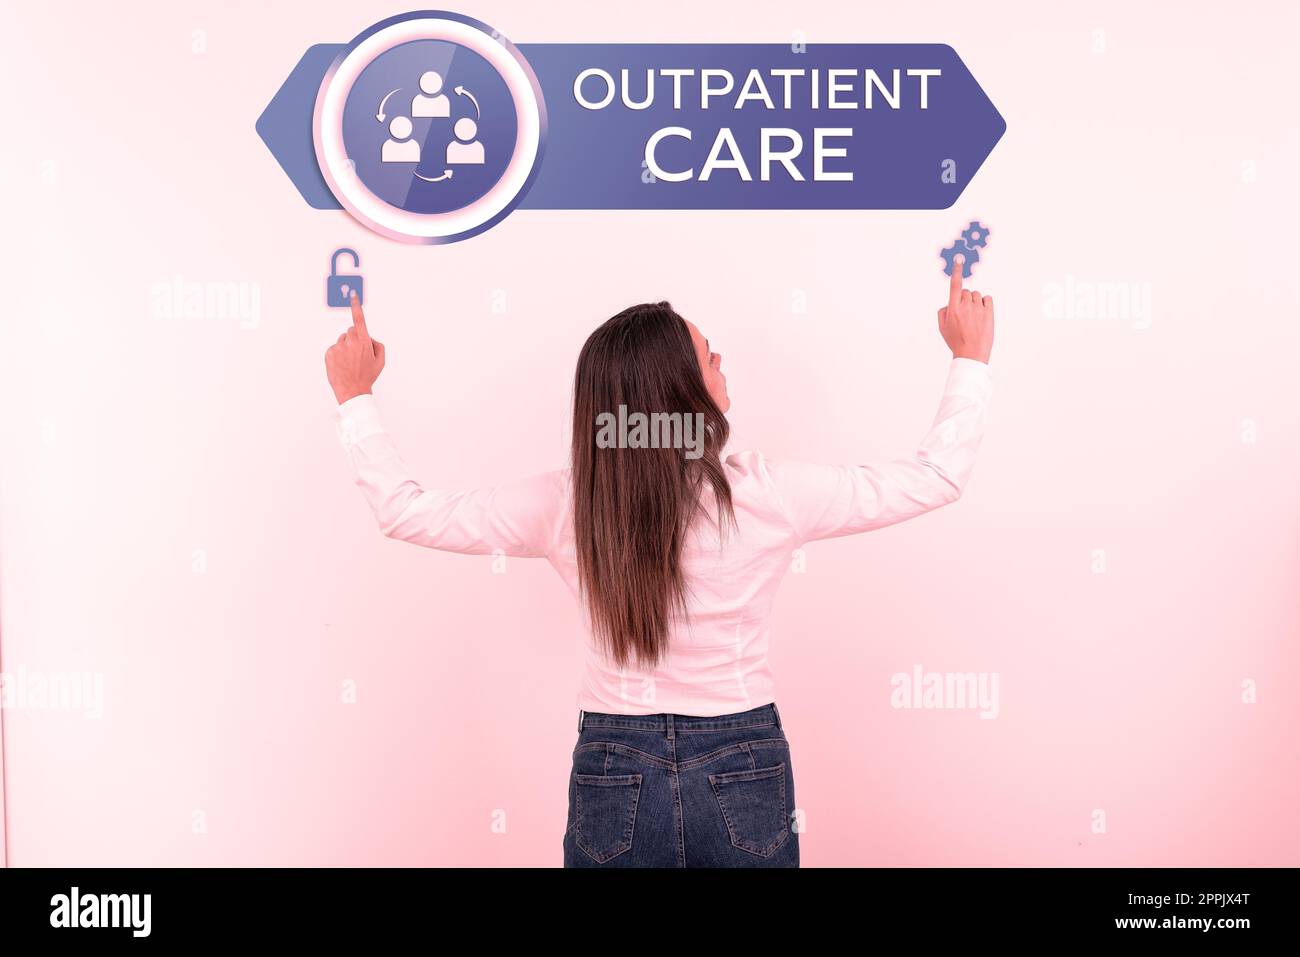 Text sign showing Outpatient Care. Business showcase the final result of something or how the way things end up Stock Photo